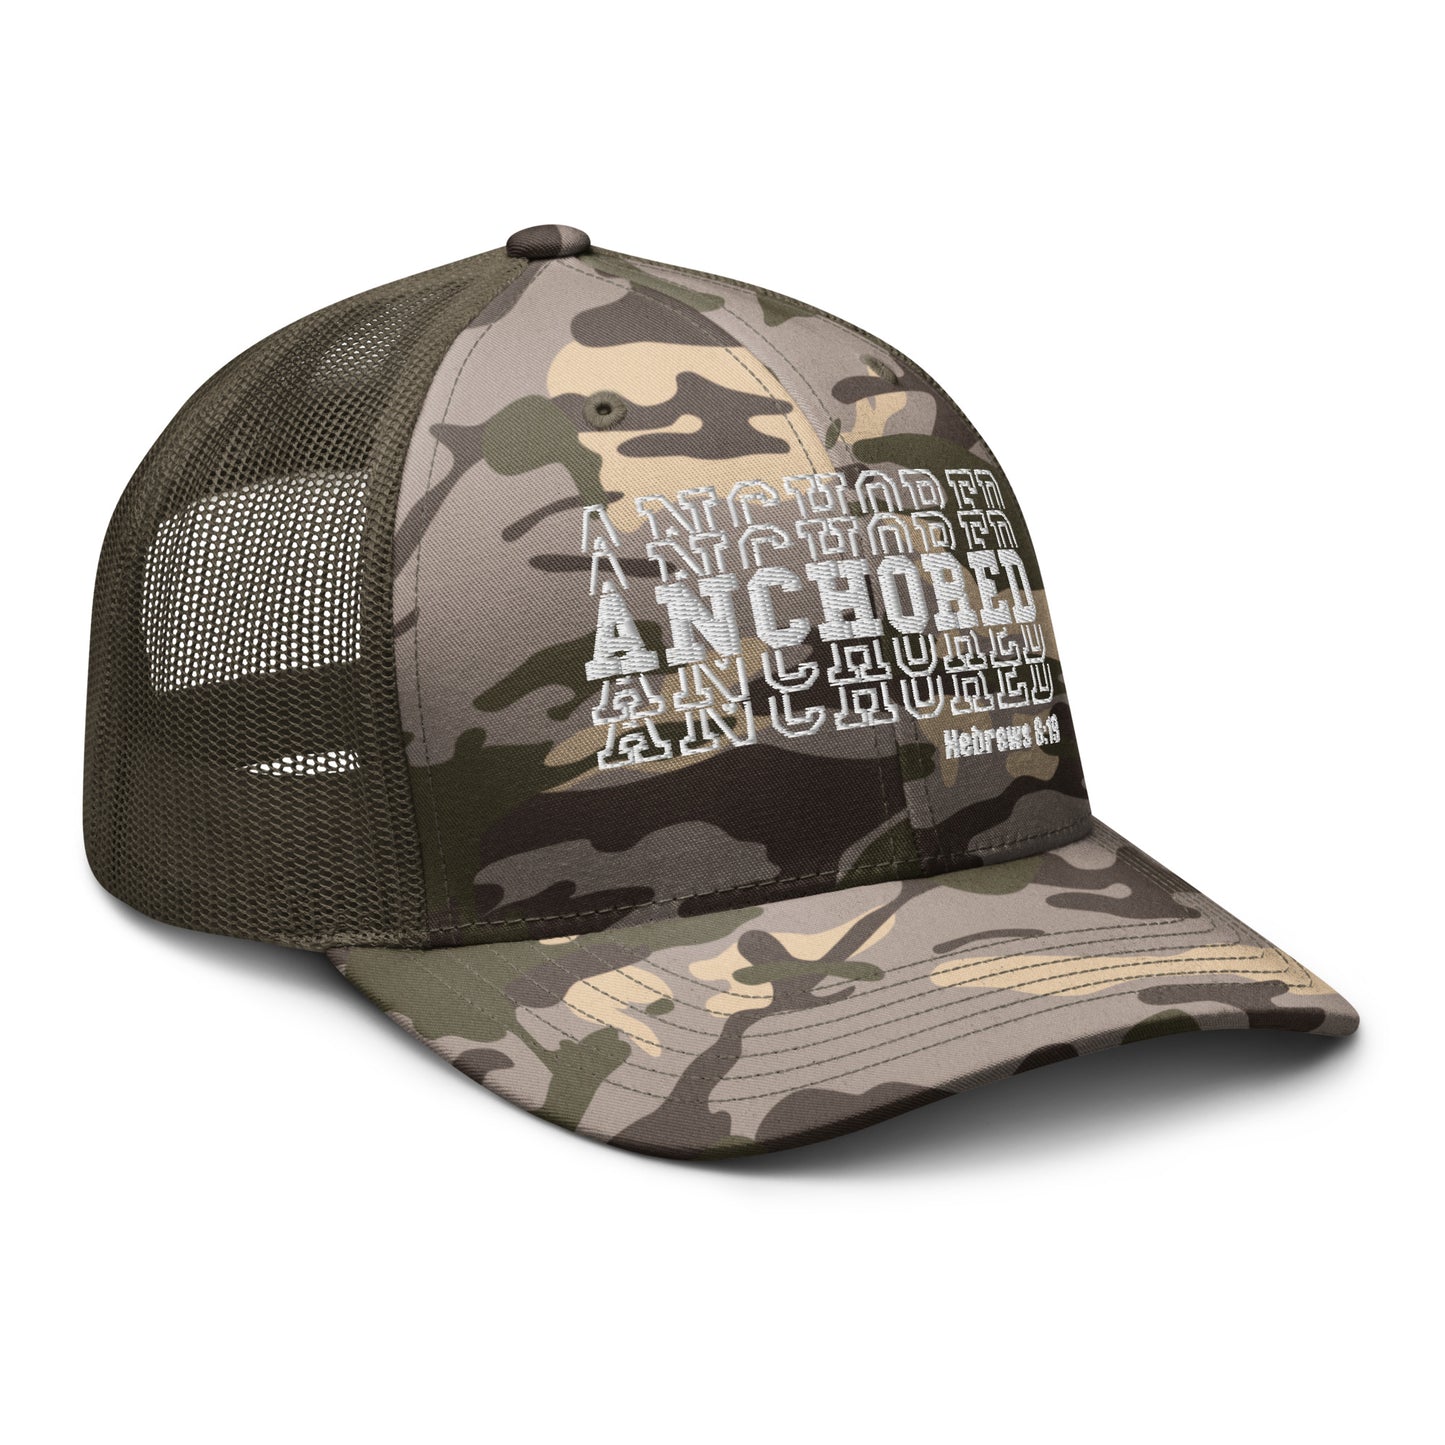 "Anchored" Camouflage Trucker Hat